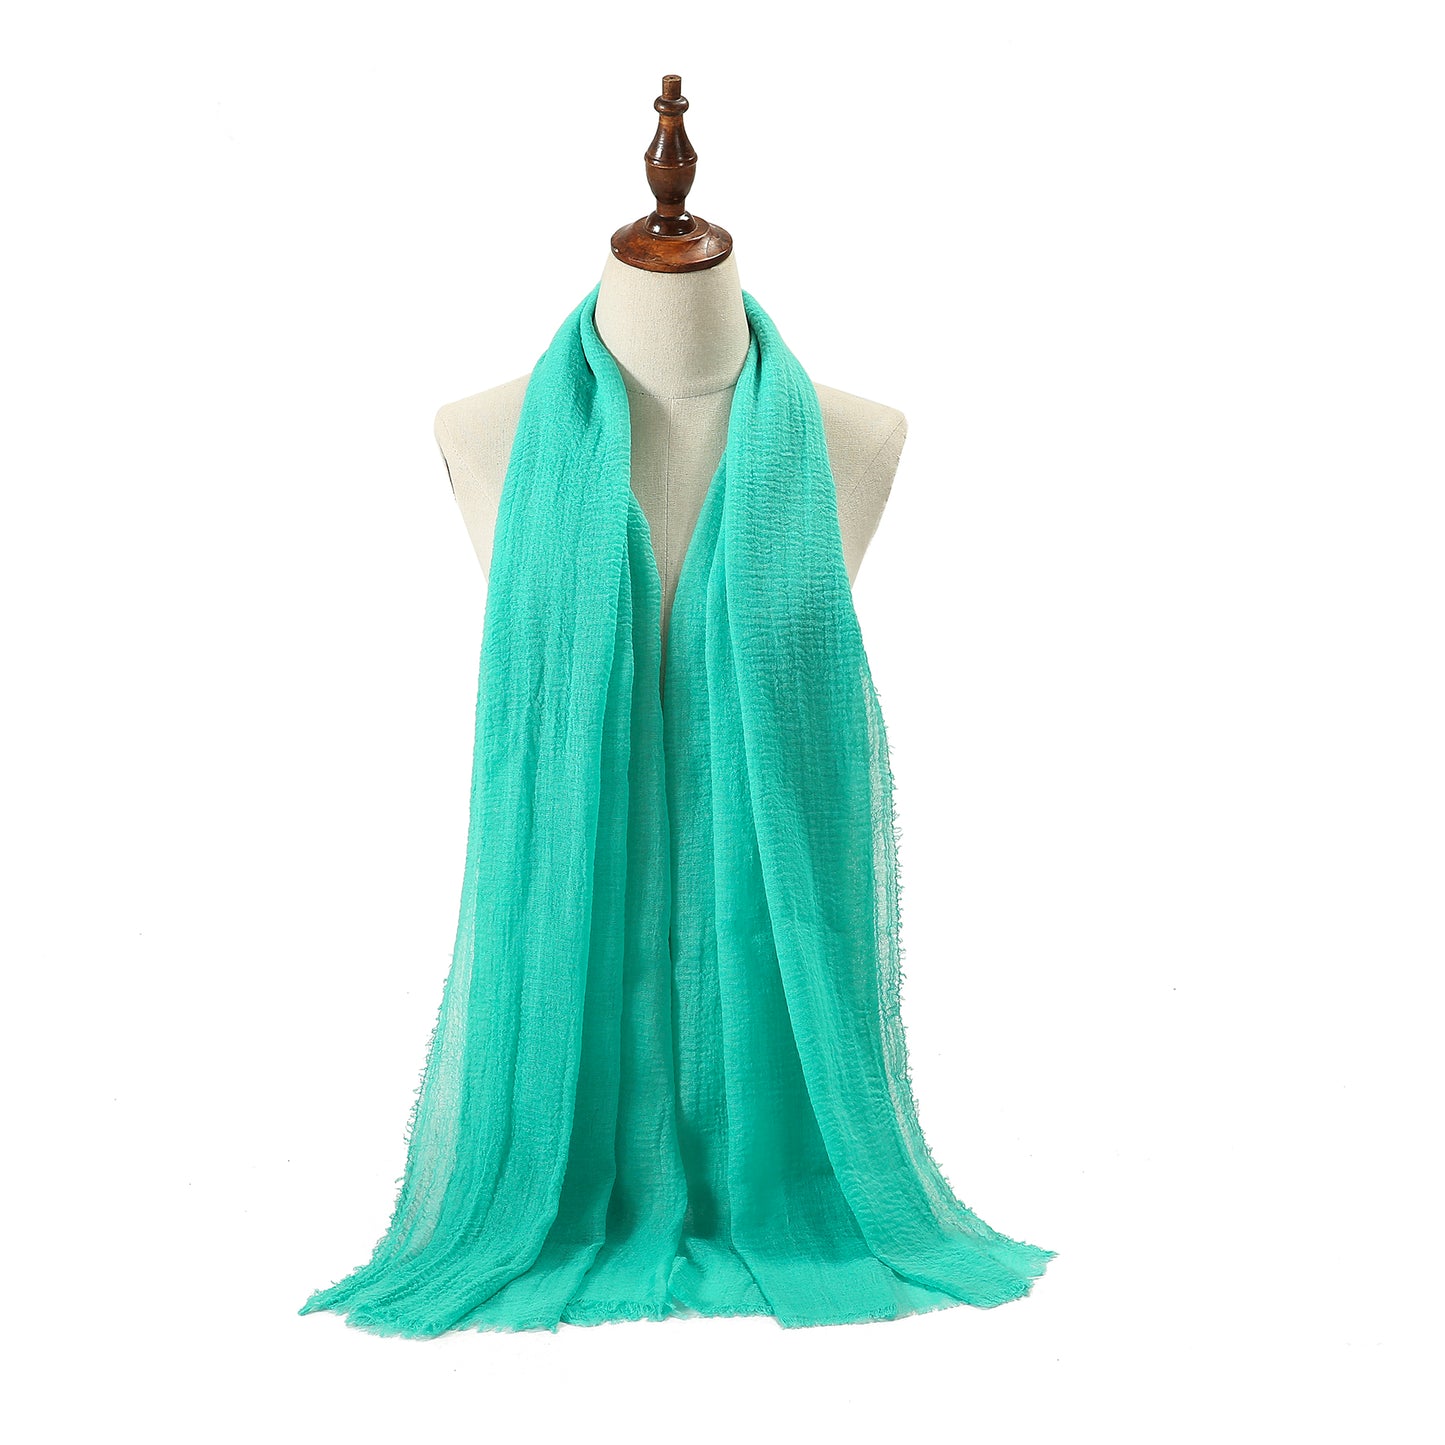 The all time essential scarf zeegroen